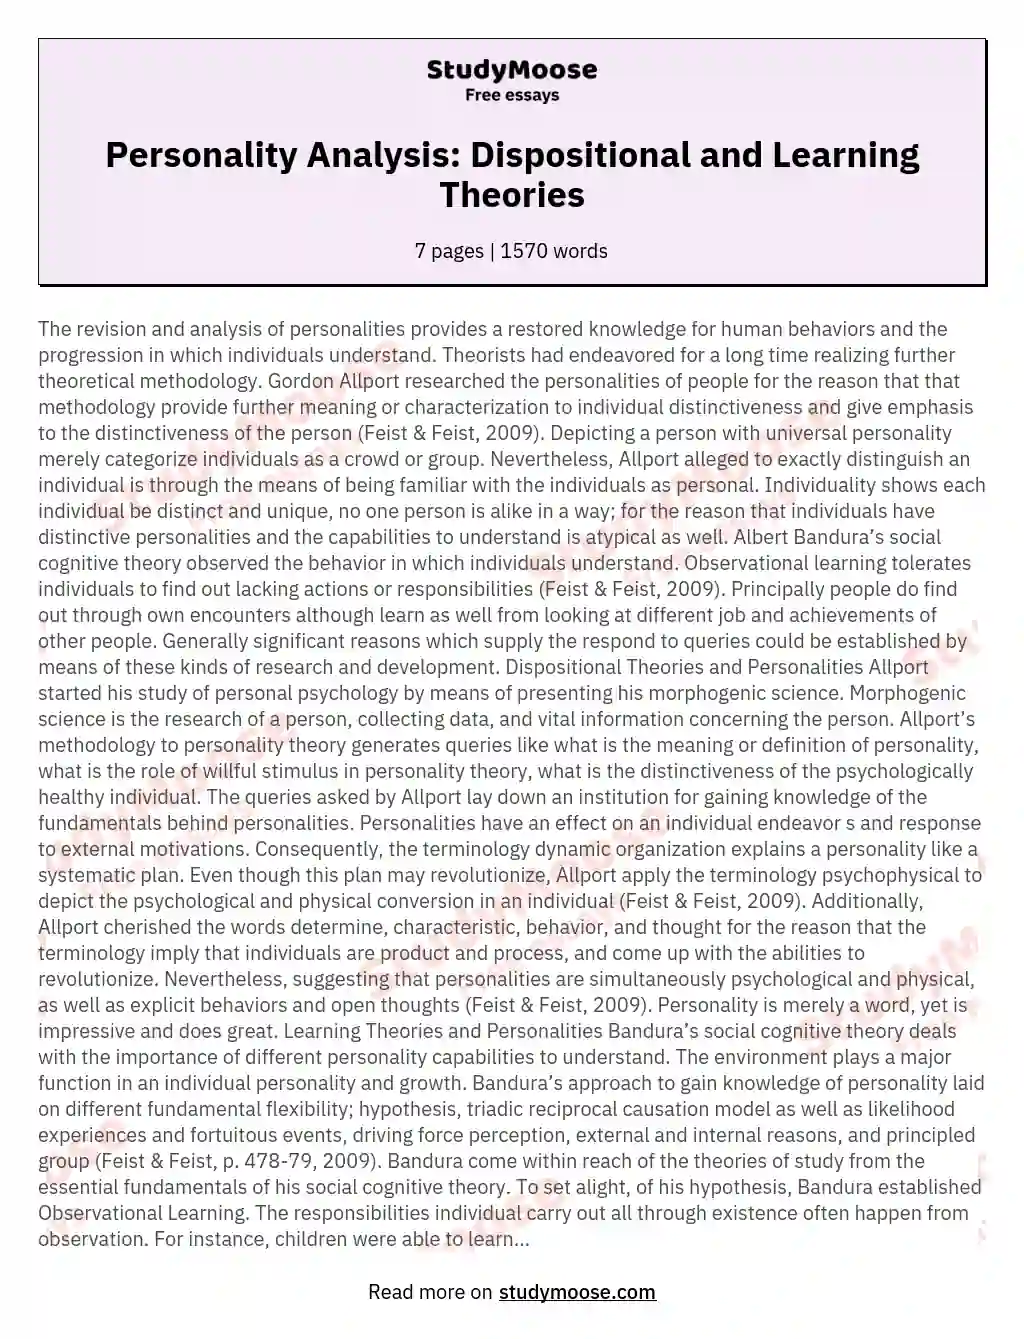 Personality Analysis: Dispositional and Learning Theories essay